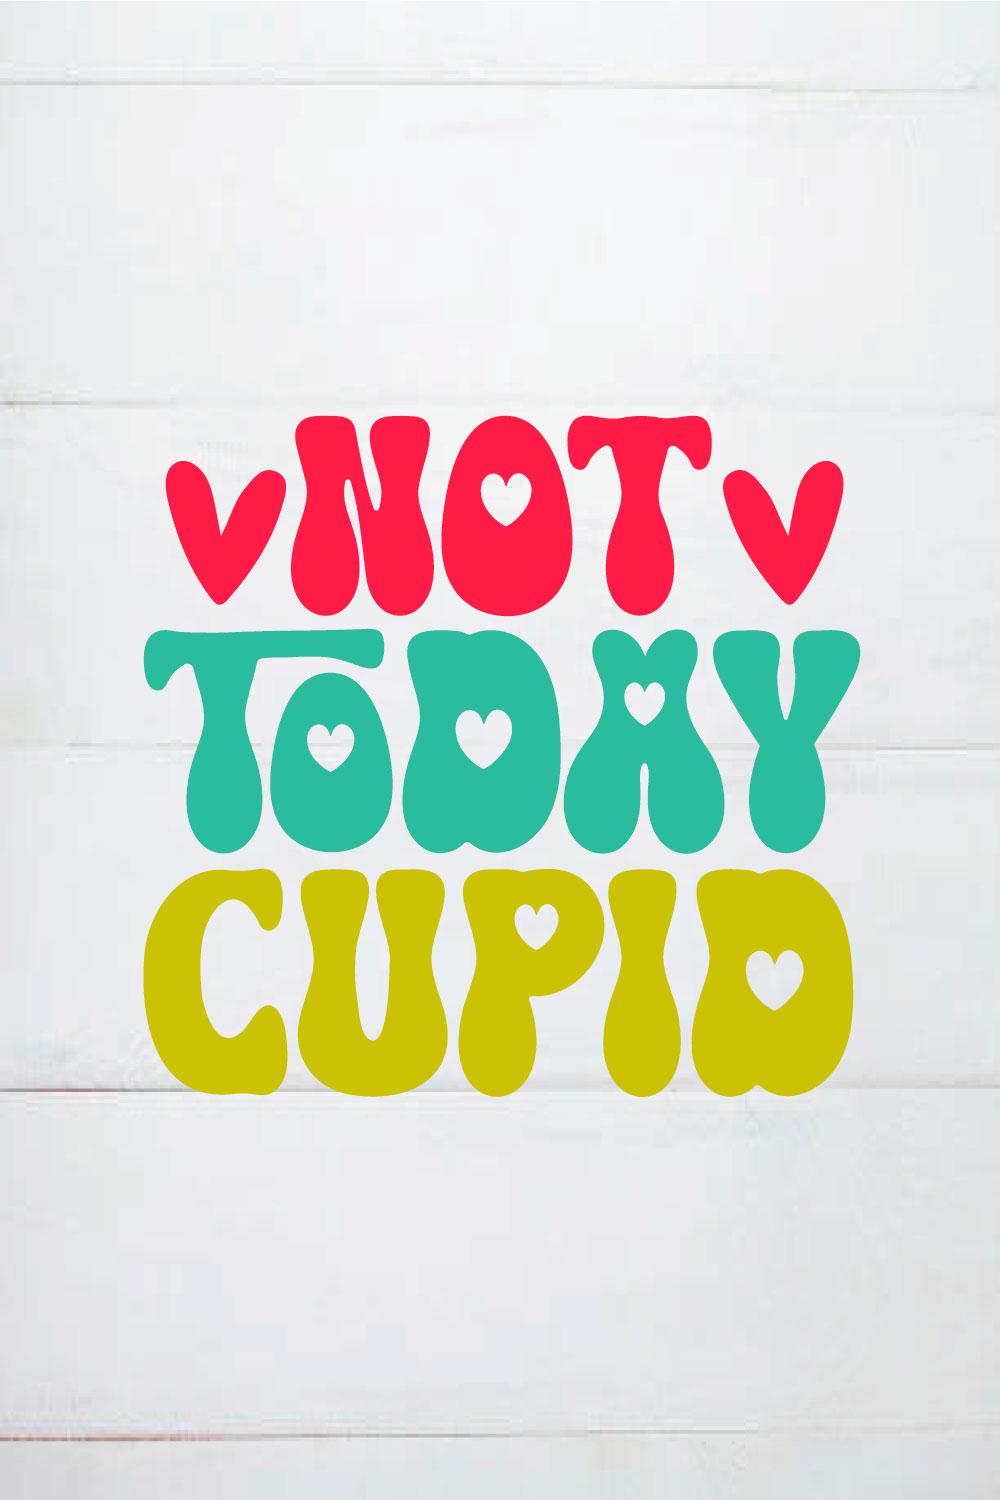 not today cupid retro pinterest preview image.